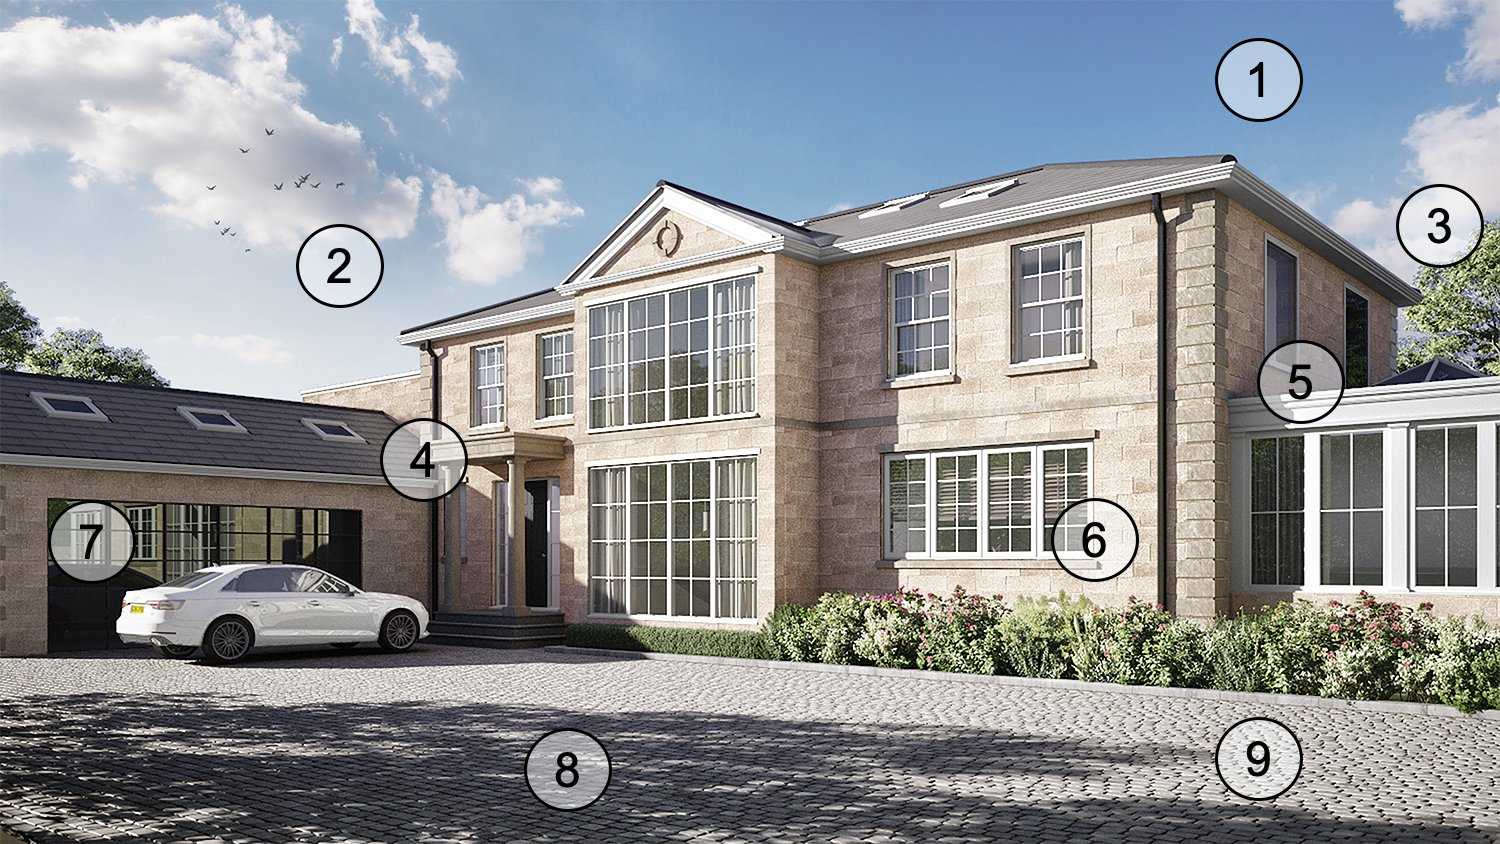 9 must-haves for any great property CGI The Pixel Workshop